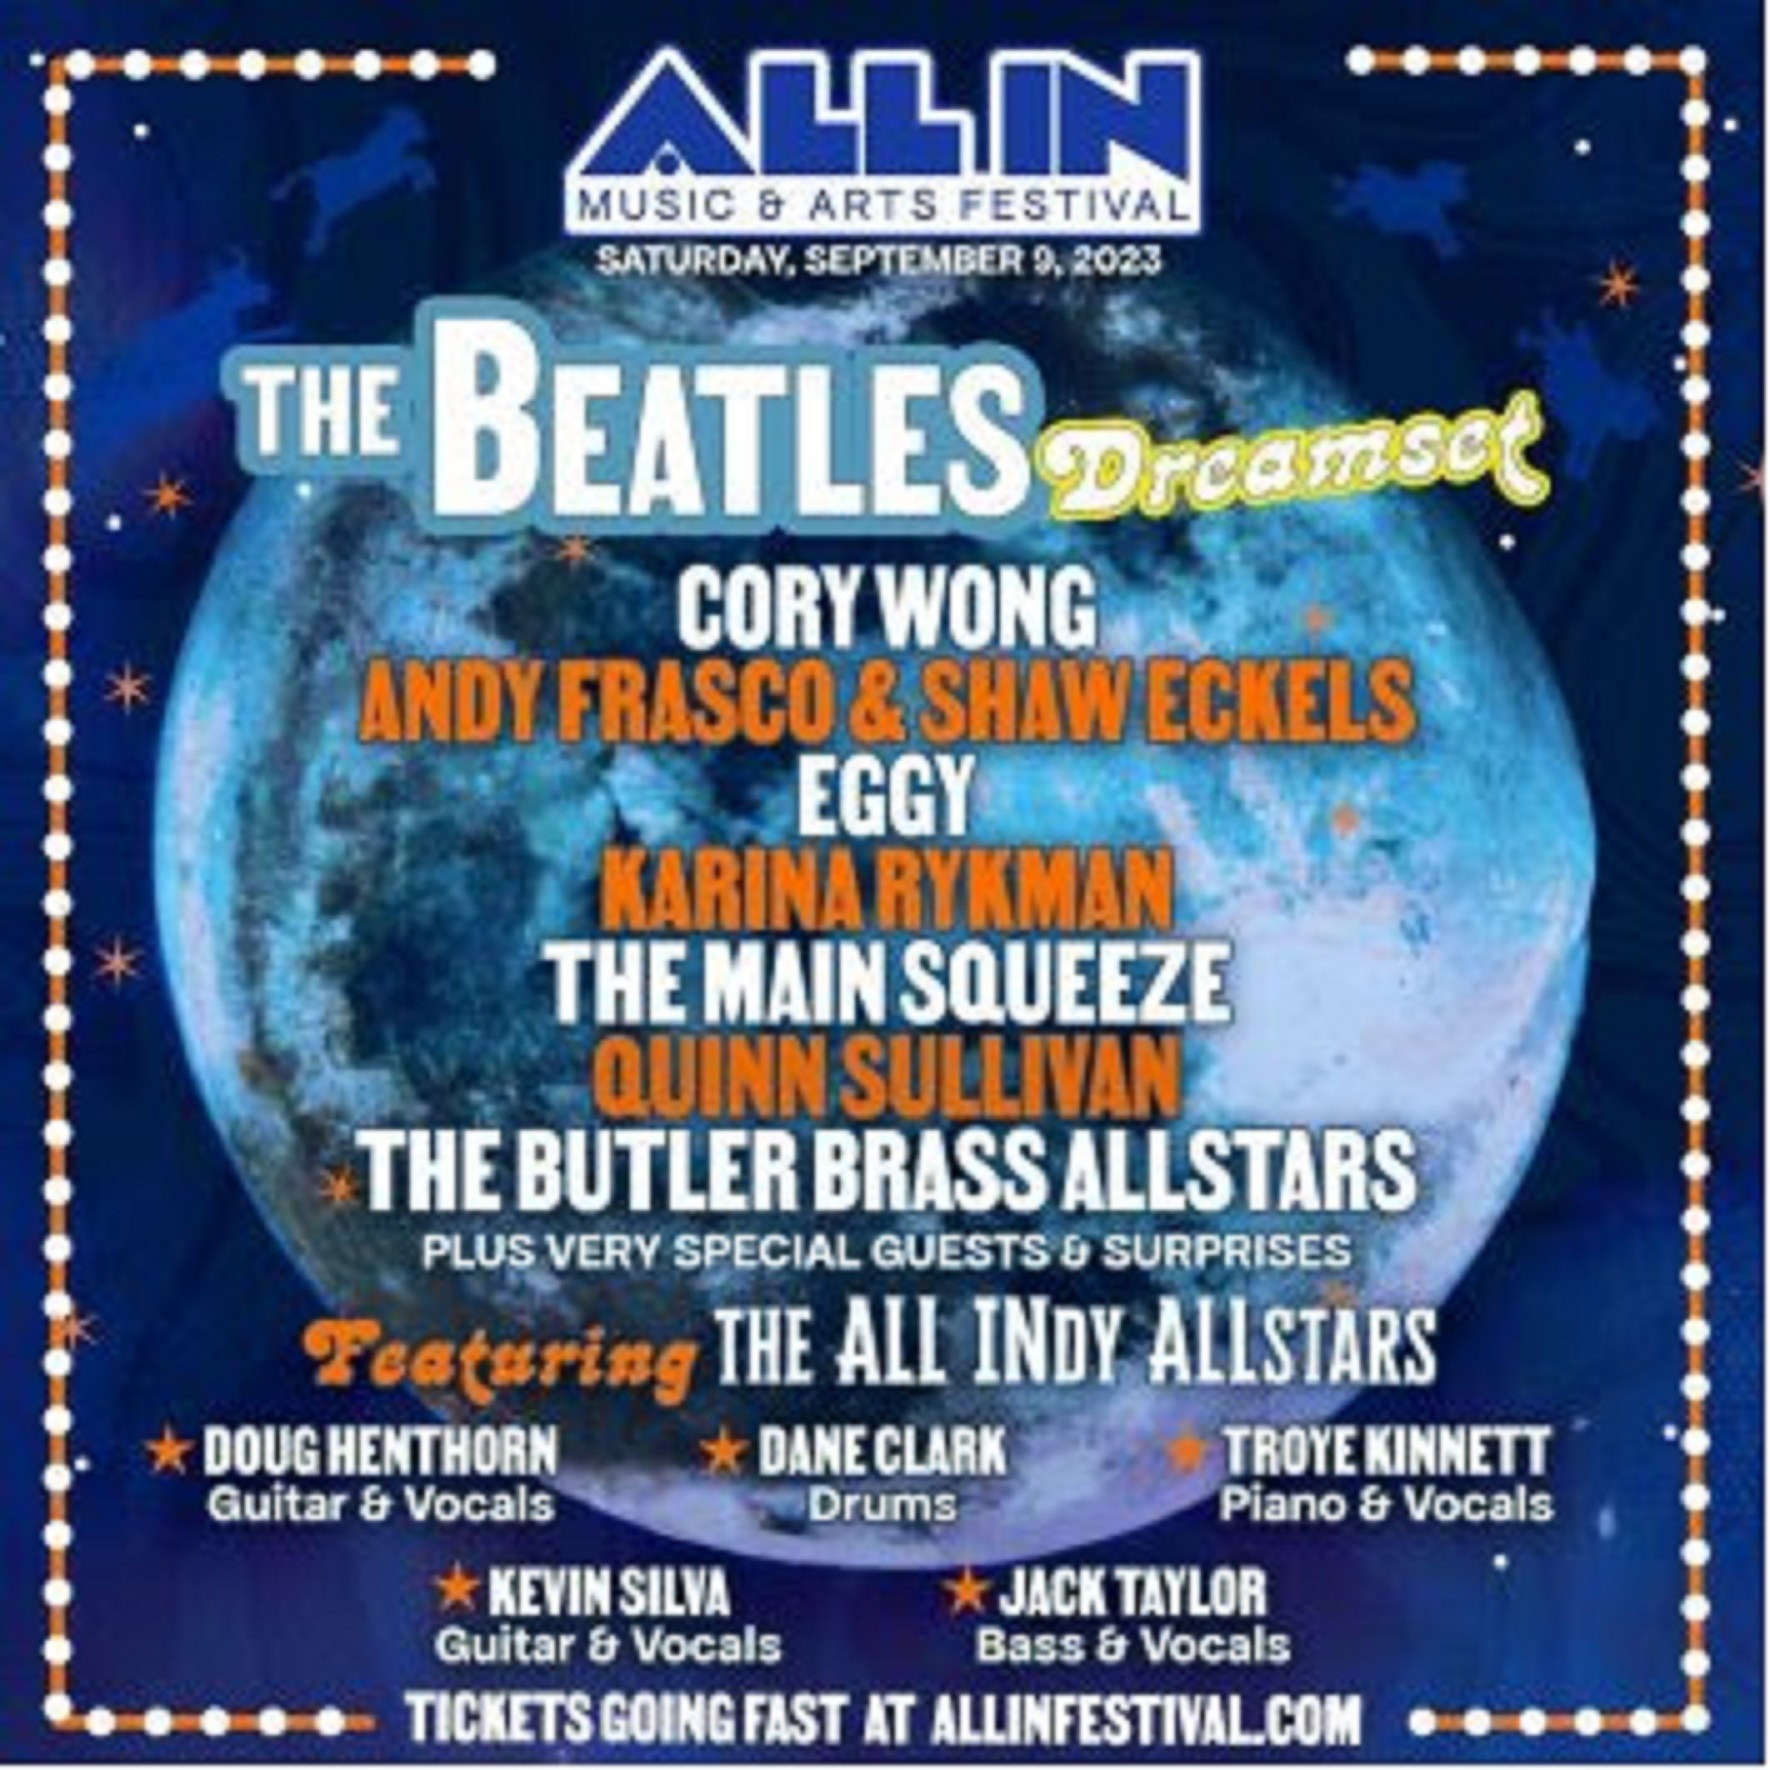 INDY’S ALL IN MUSIC FESTIVAL ANNOUNCES DETAILS FOR THE 2023 DREAMSET CELEBRATING THE SONGS OF THE BEATLES